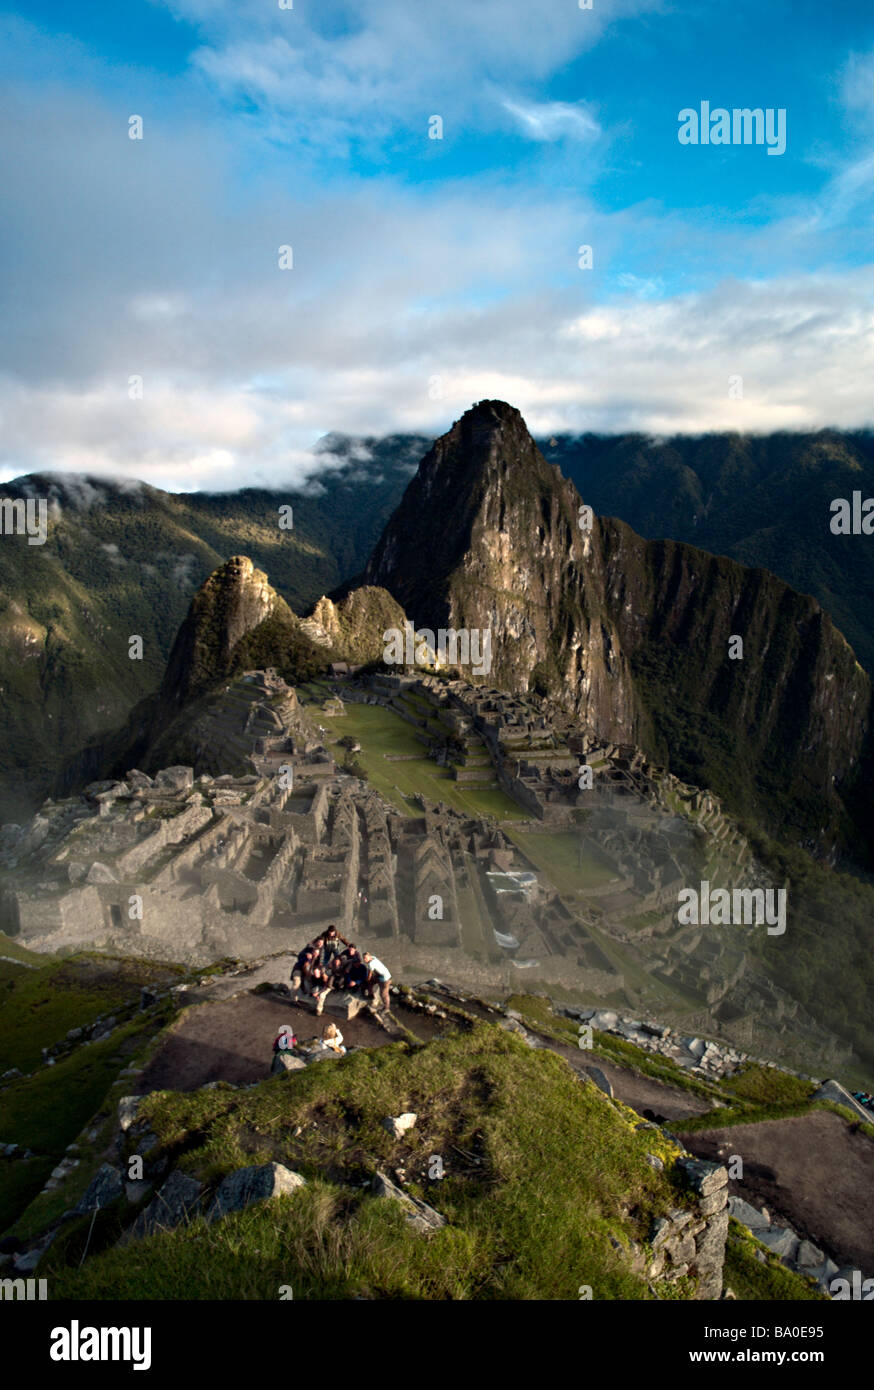 PERU MACHU PICCHU Group poses for photo in front of Machu Picchu at sunrise with Huayna Picchu in the background Stock Photo